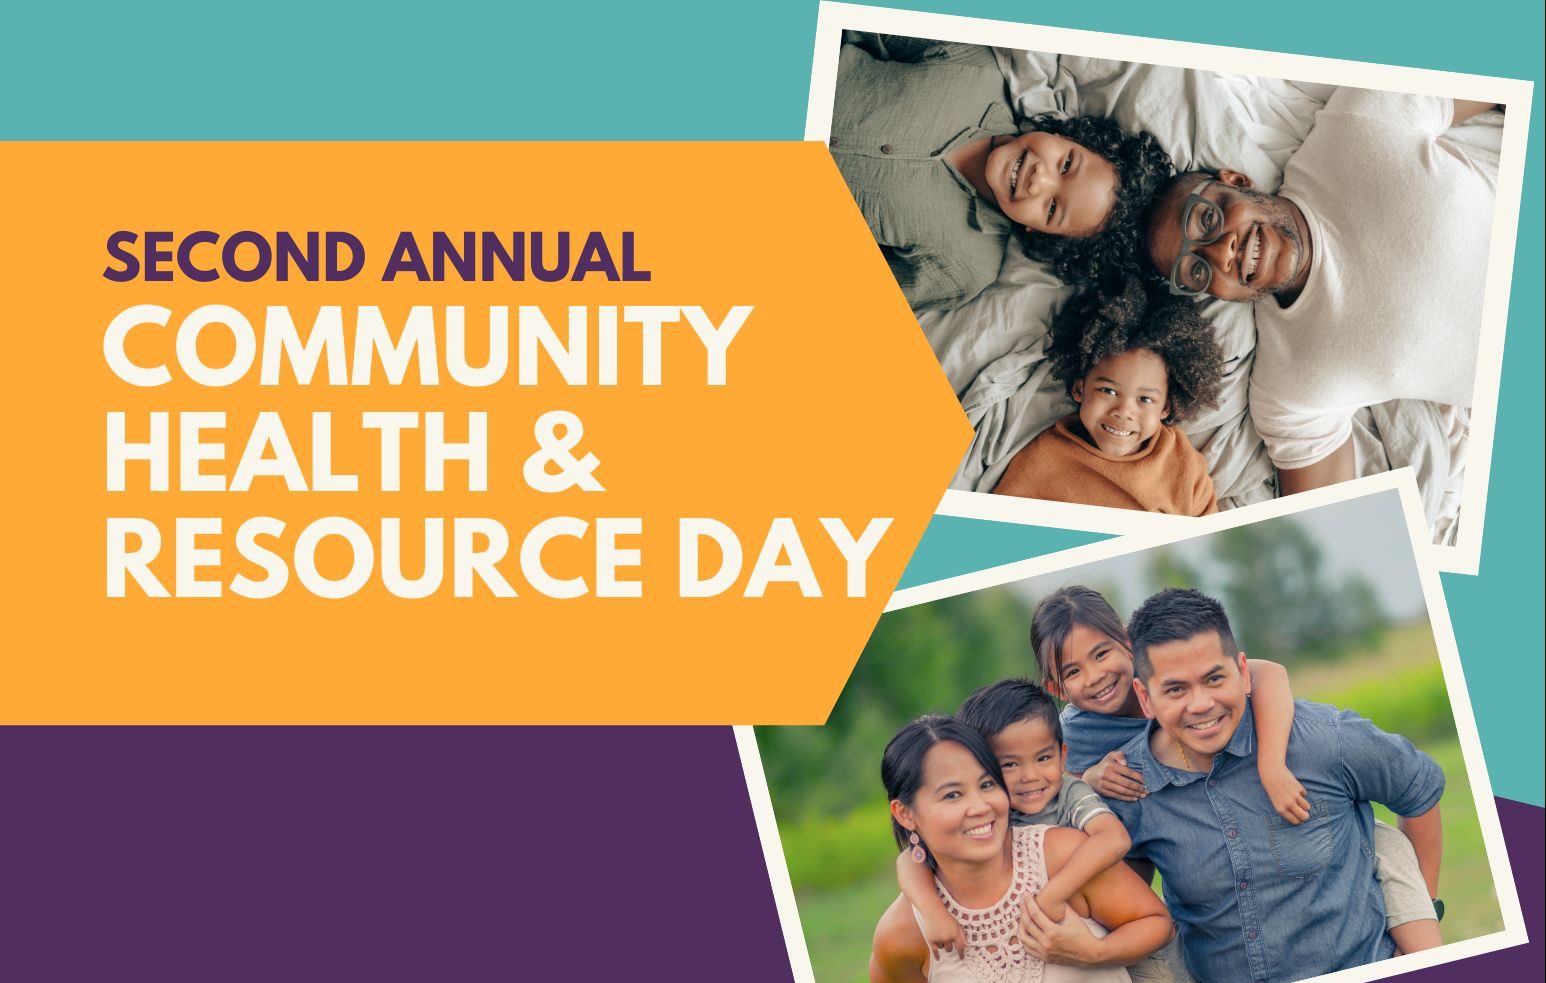 Public Health Hosts Second Annual Community Health & Resource Day